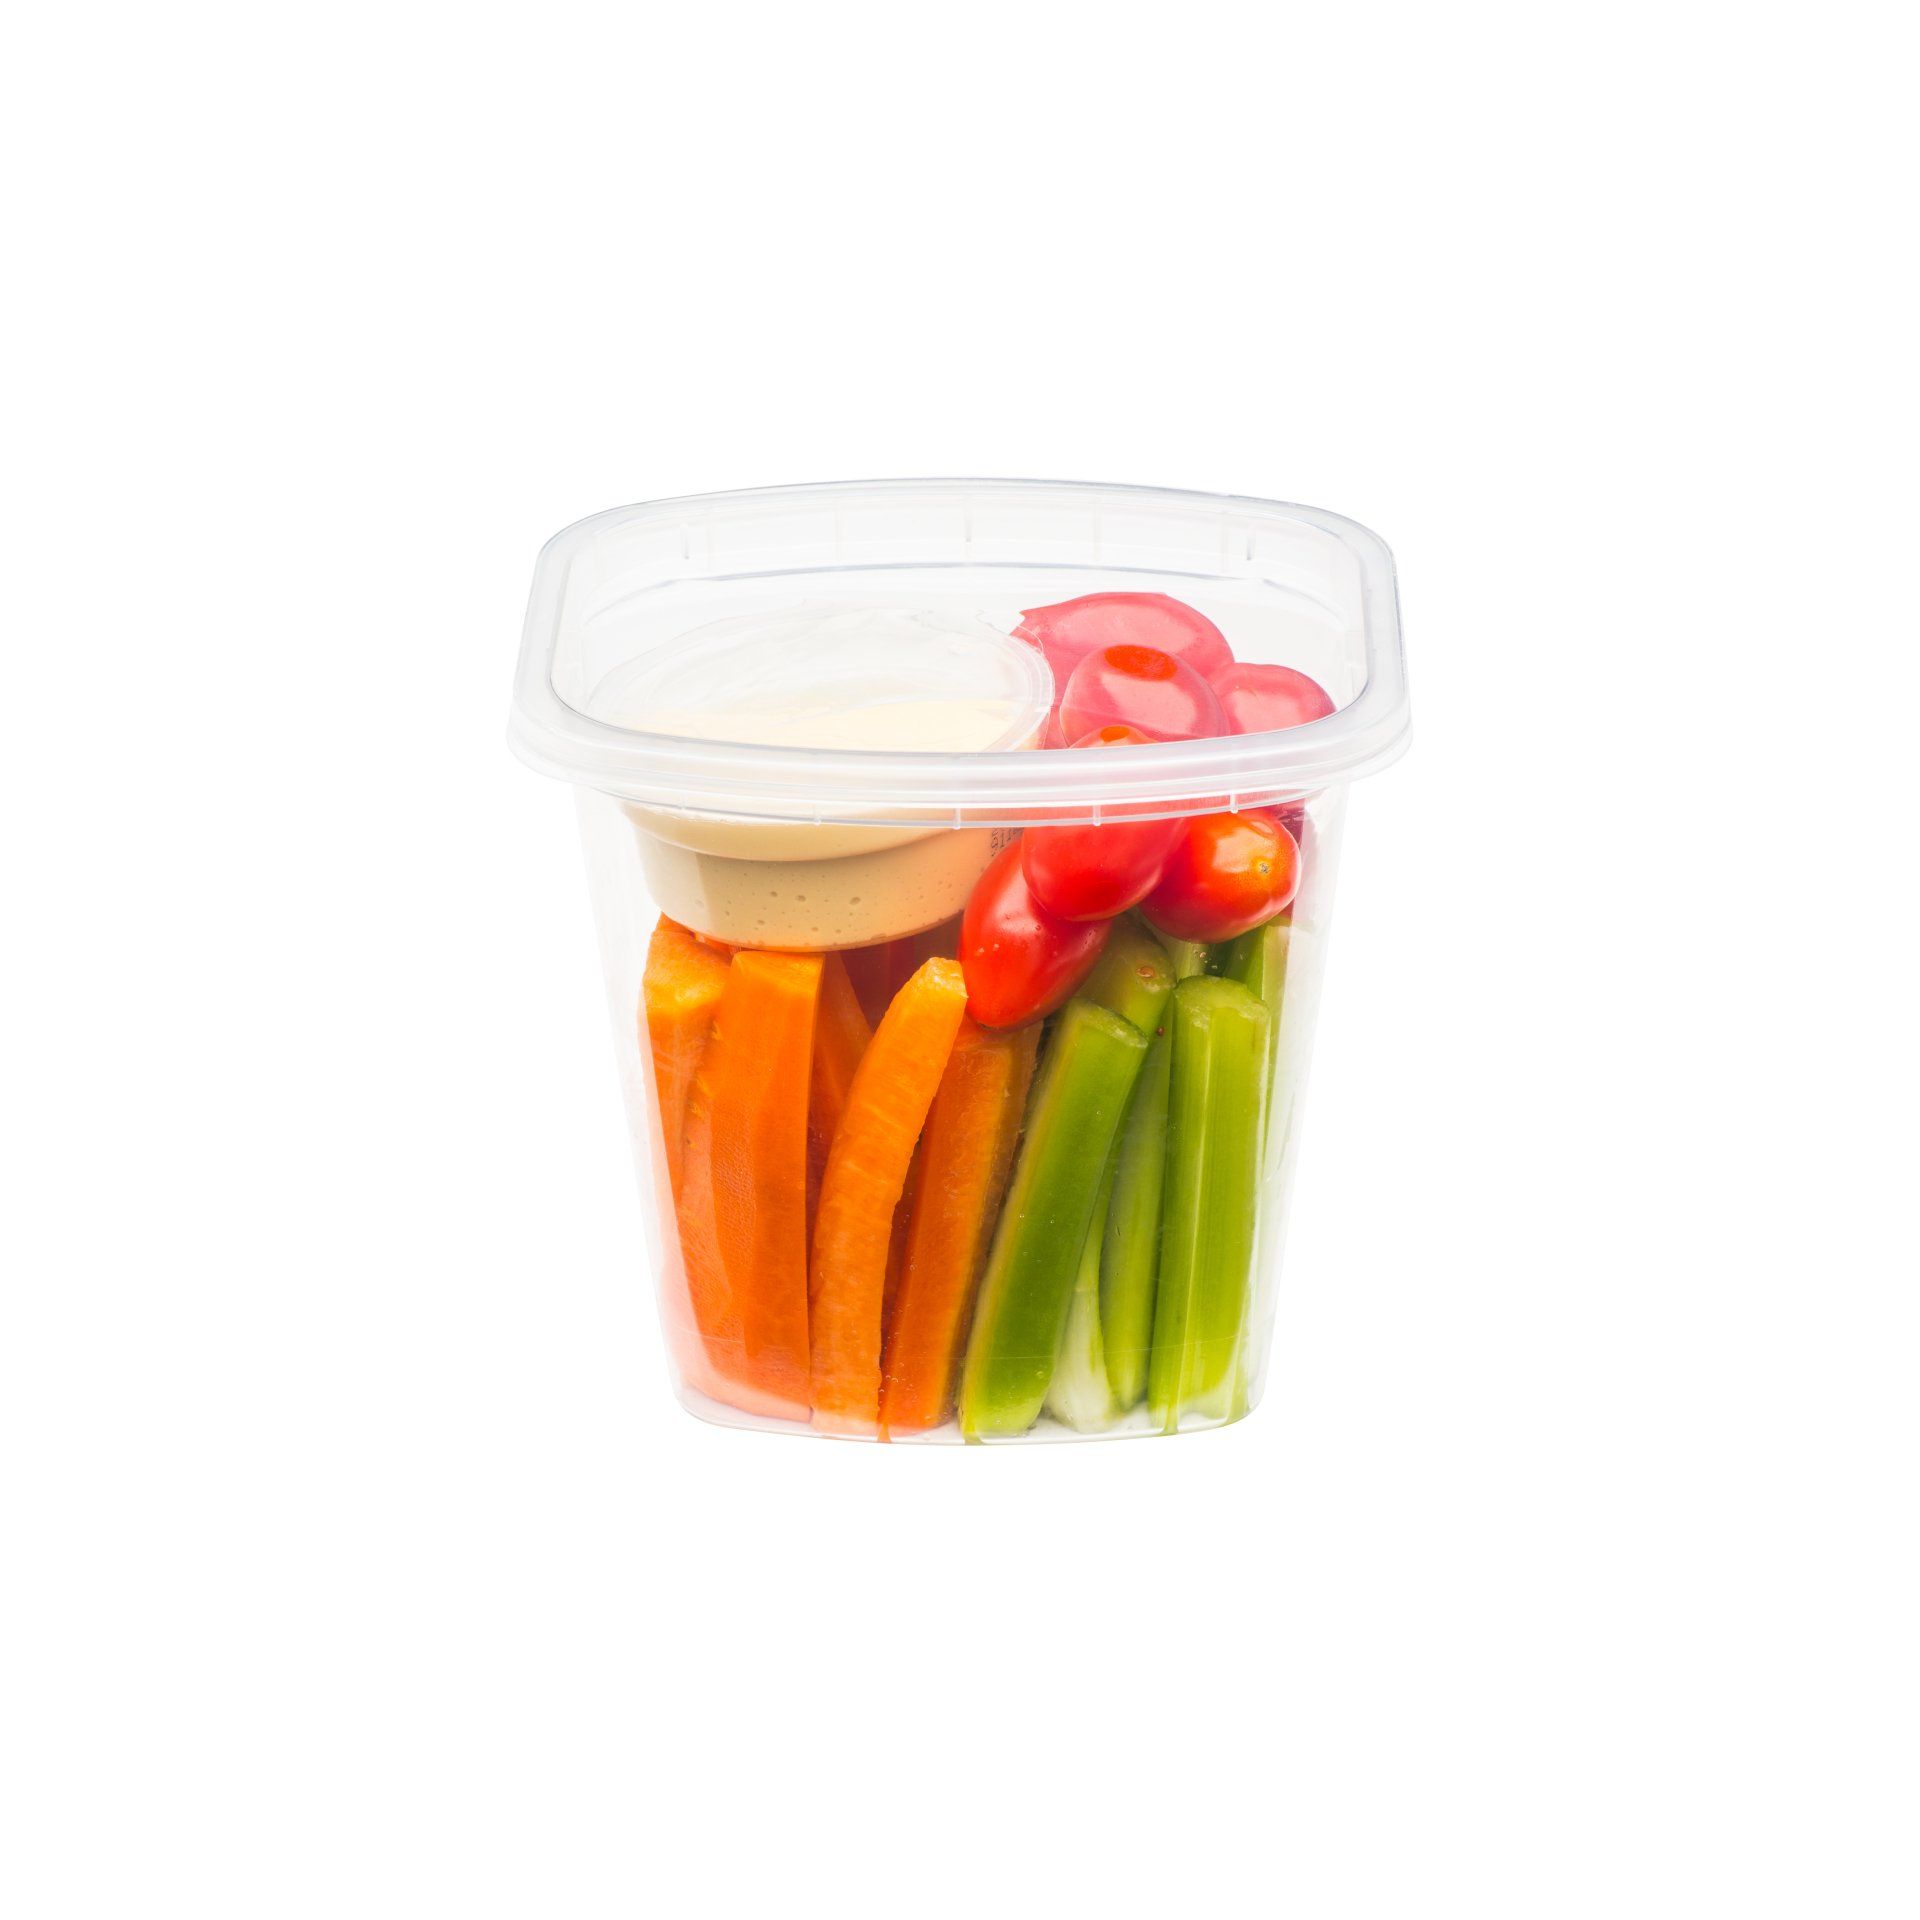 Food Containers For Grocery Stores & Retailers - Cube Packaging